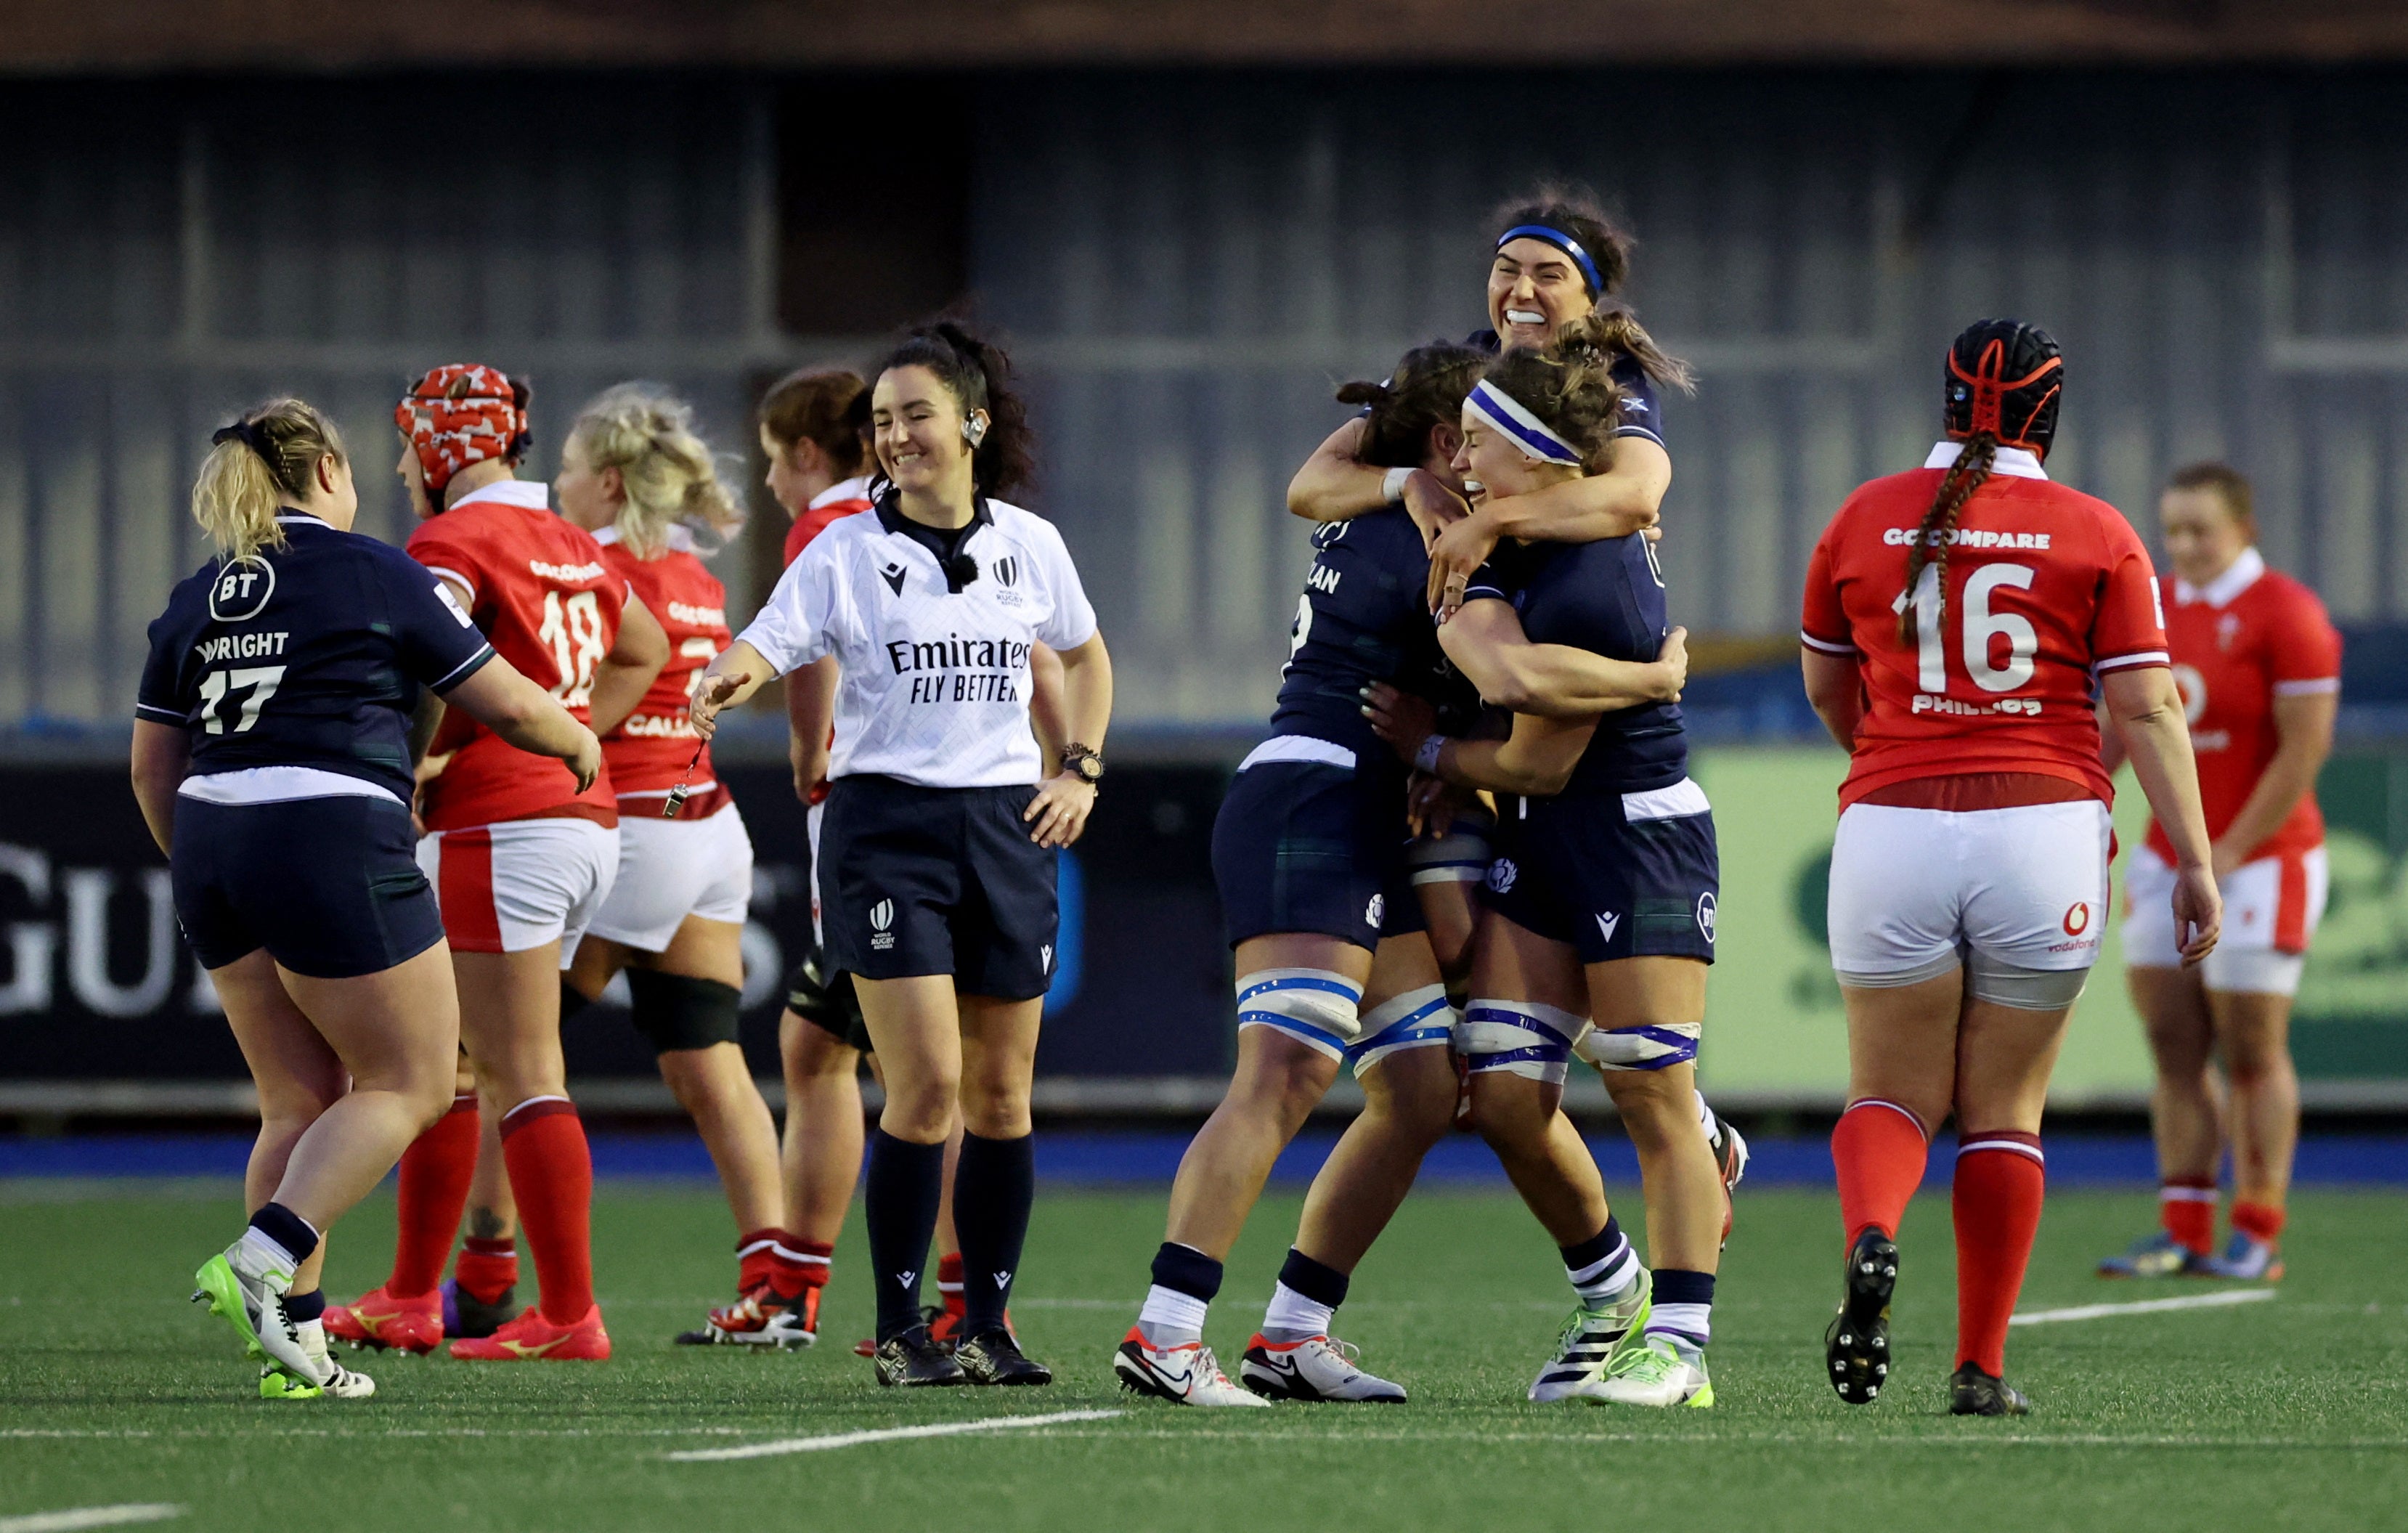 Scotland celebrate after holding on against Wales